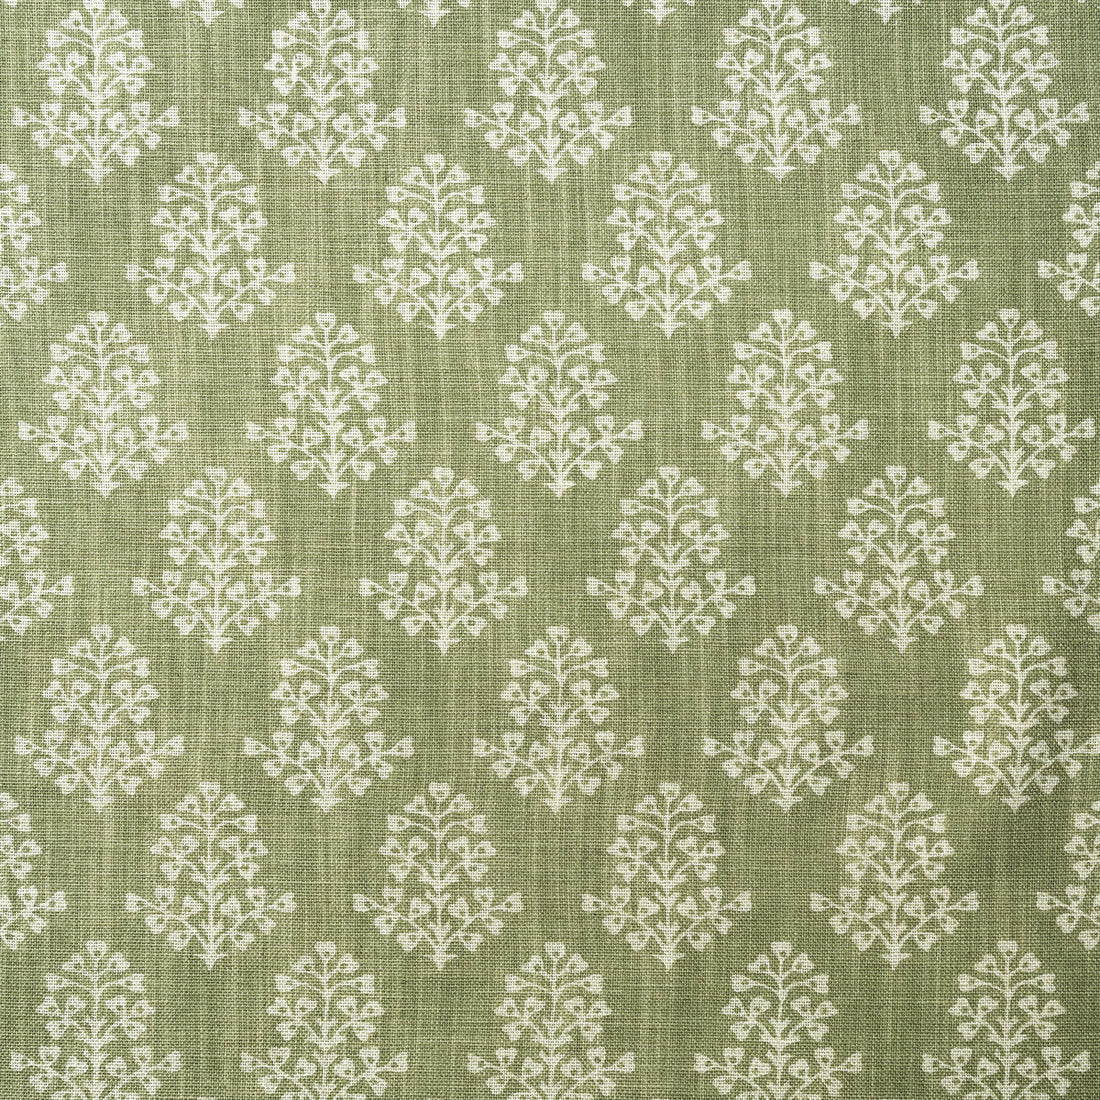 Sprig fabric in fennel color - pattern AM100384.123.0 - by Kravet Couture in the Andrew Martin Garden Path collection